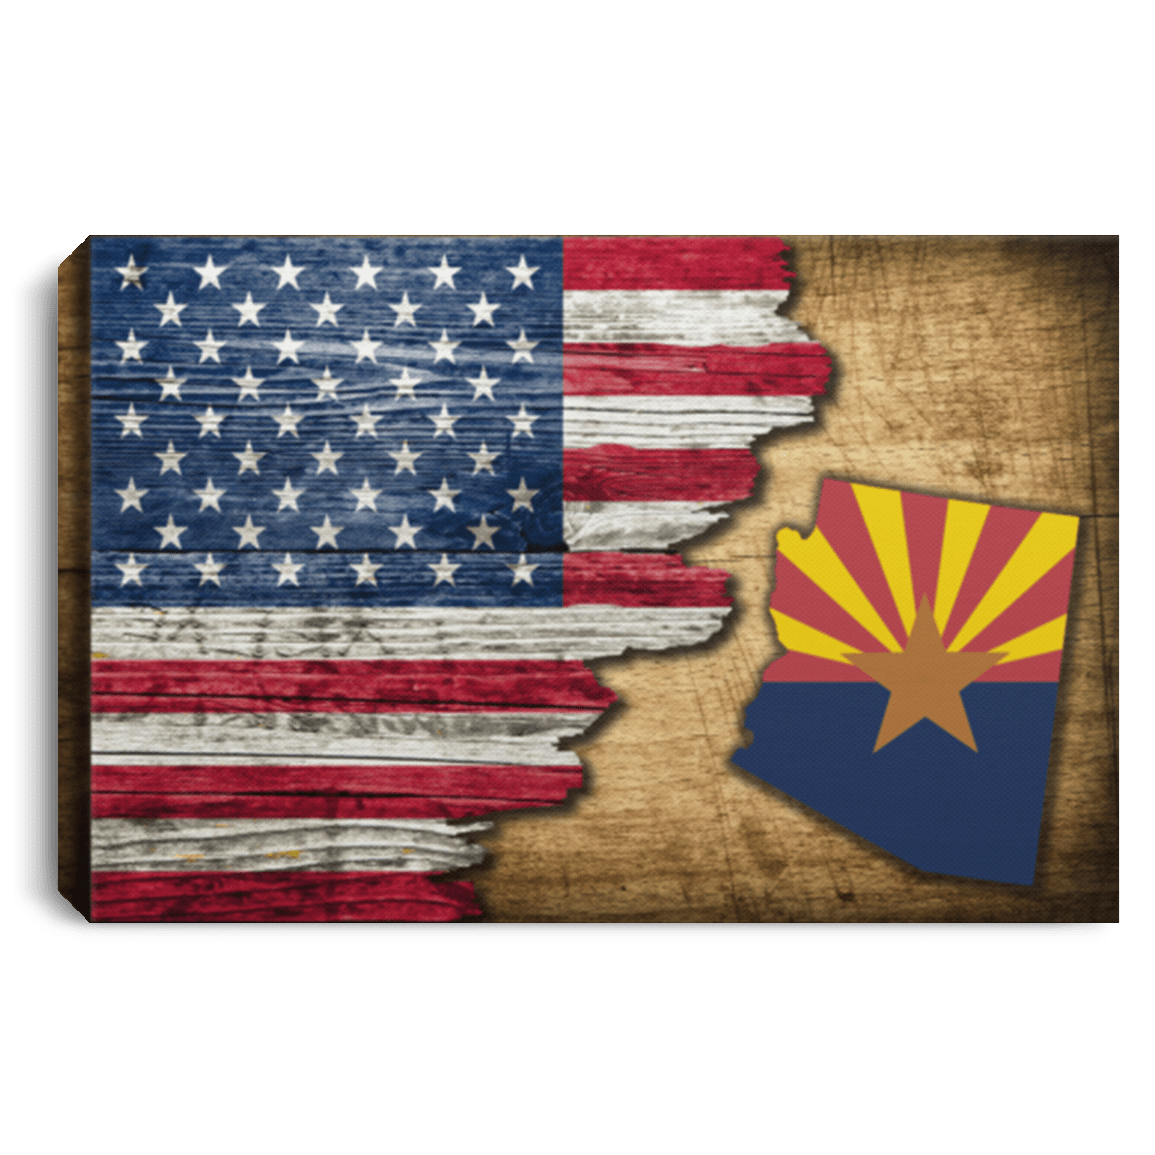 United States/Arizona Flag Ripped Effect 12X8 Inches Landscape Canvas .75In Frame